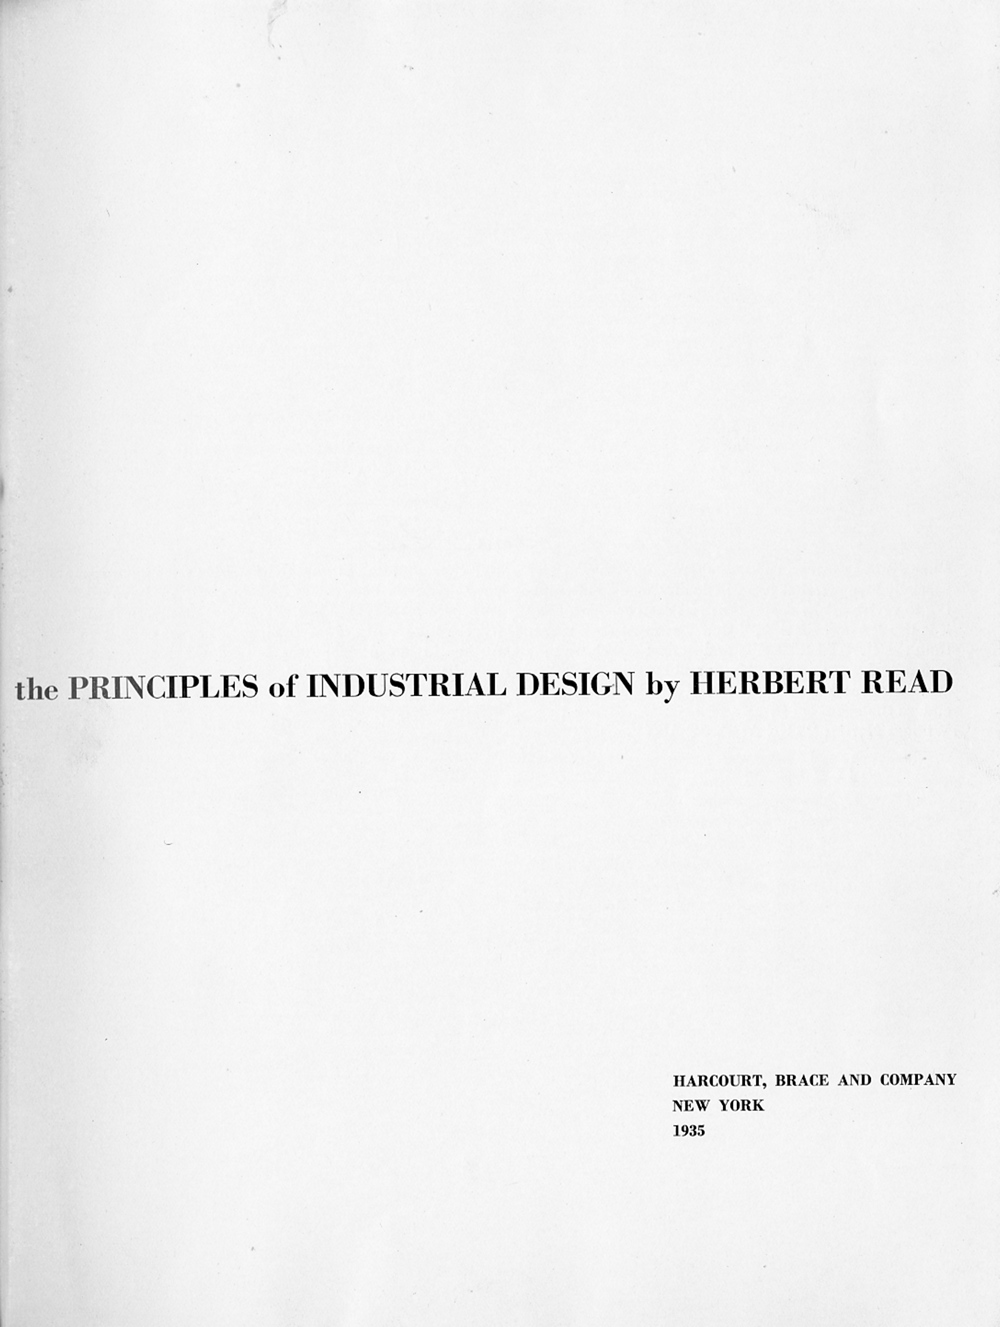 Art and Industry: The Principles of Industrial Design / Herbert Read. — New York : Harcourt, Brace and Company, 1935